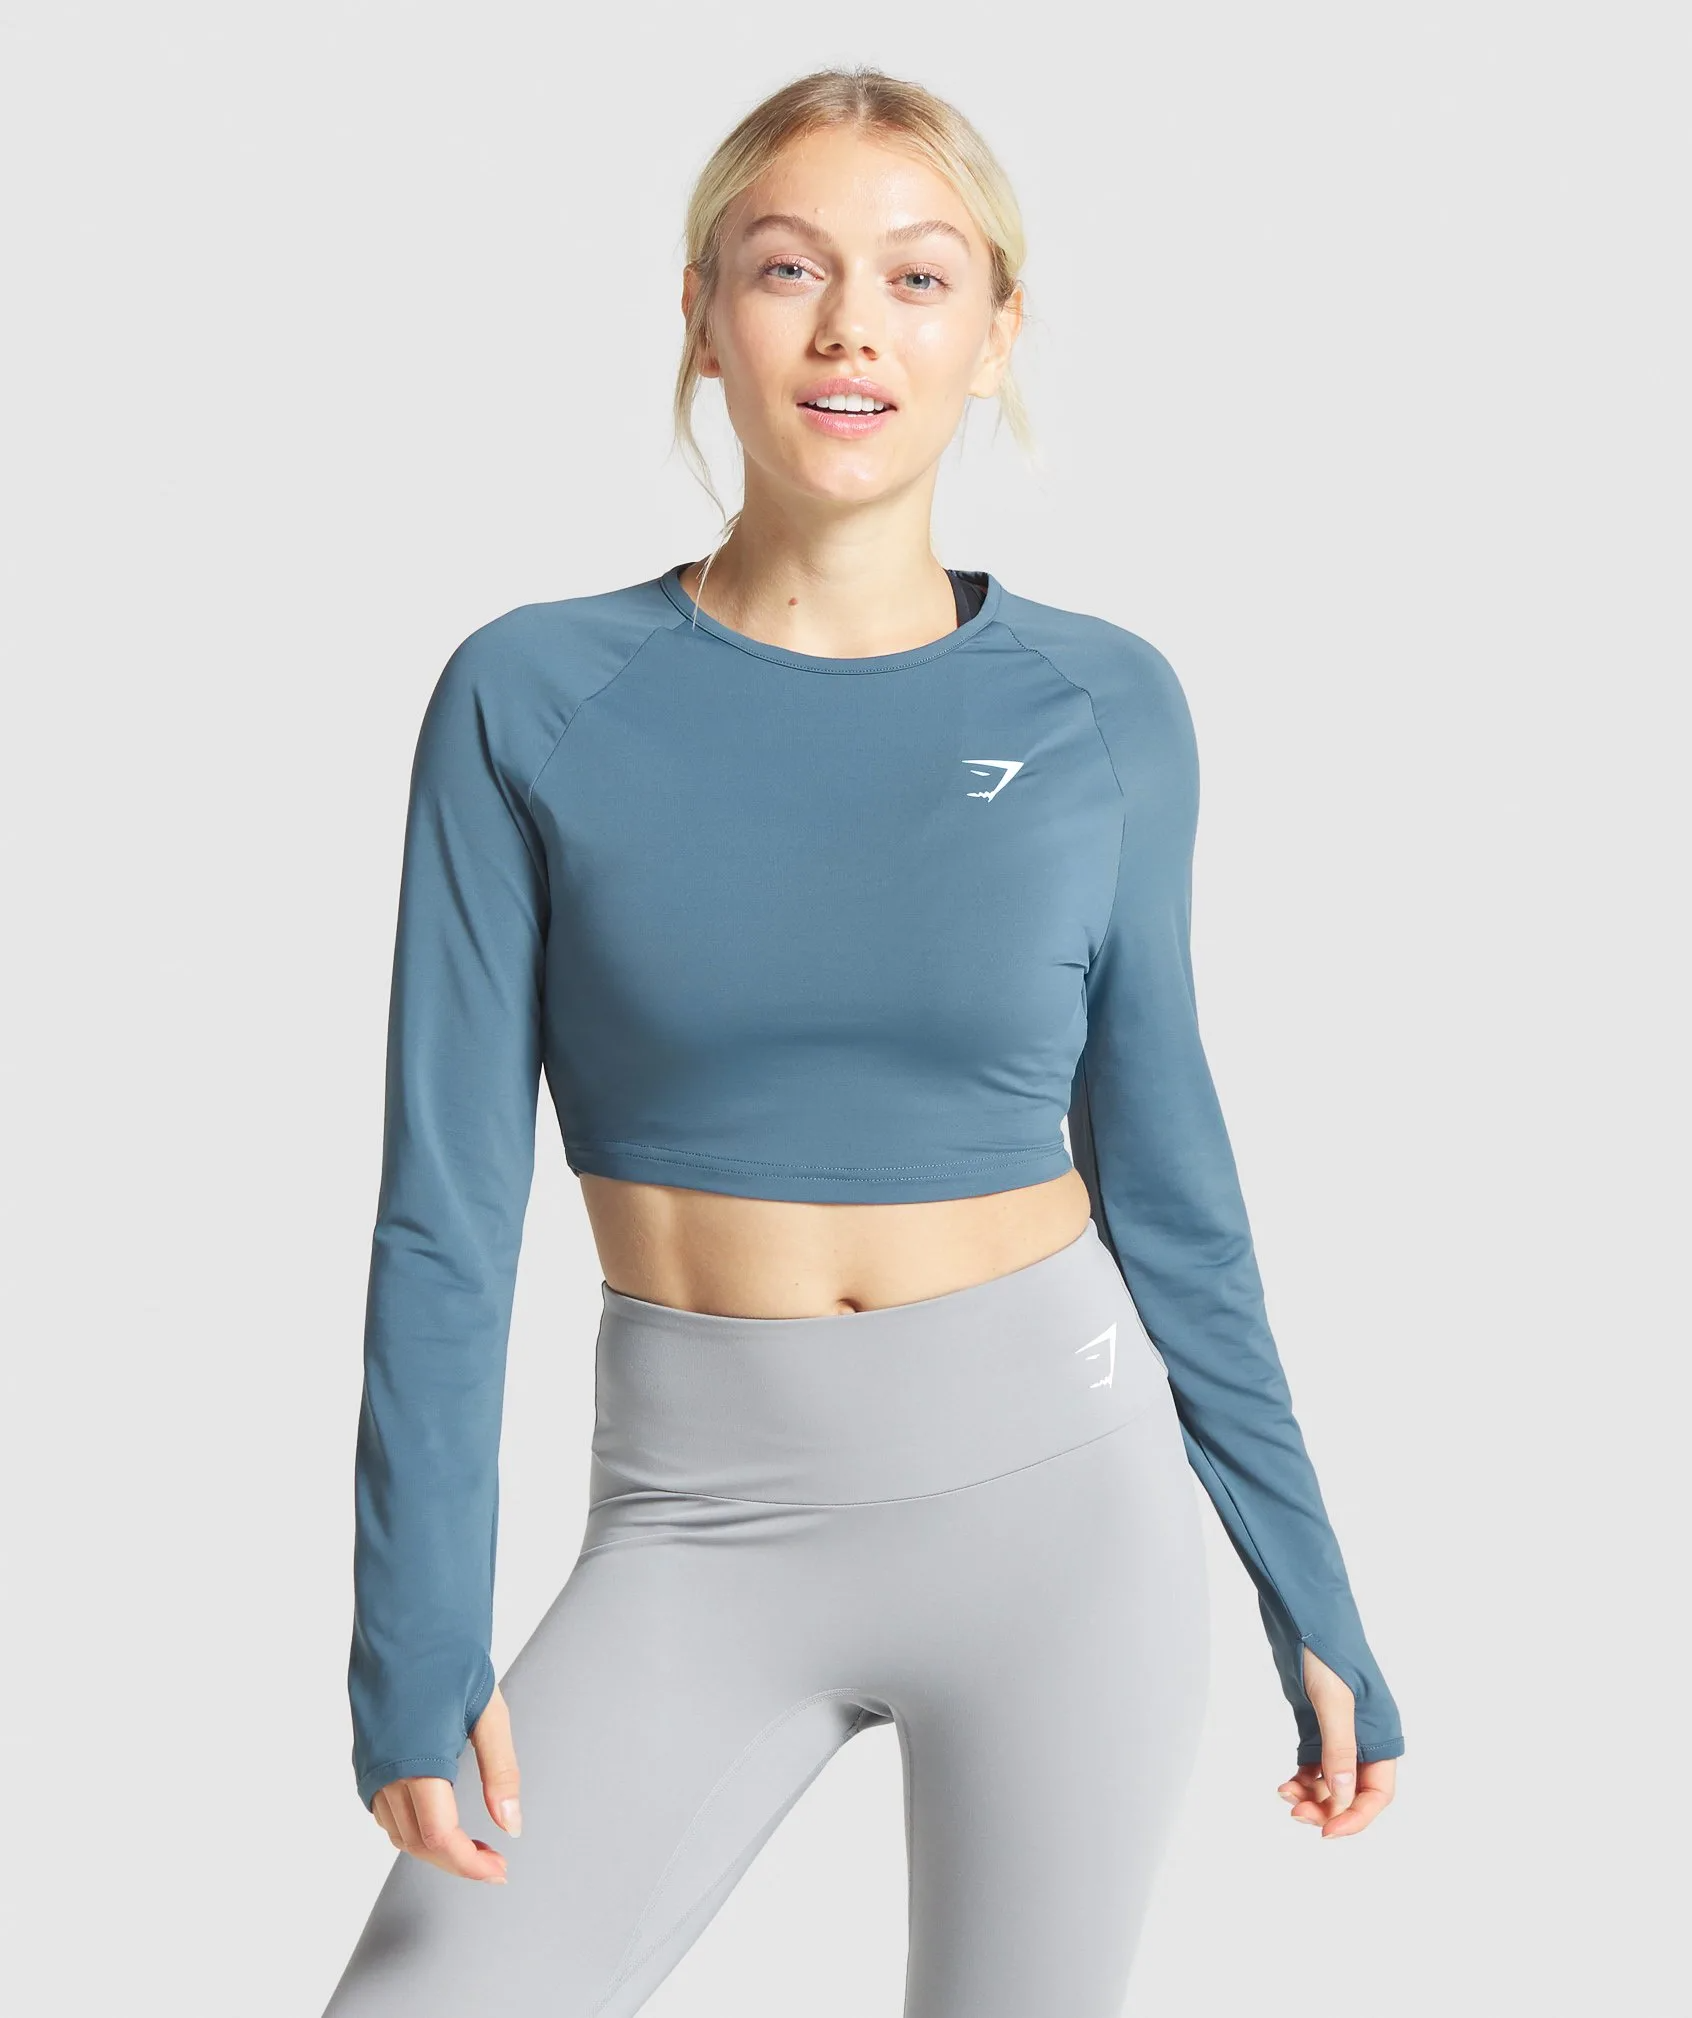 SHAPERIN Women's Sports Tops Long Sleeve Fitness Crop Top Sport Yoga Shirt Push Up Compression Sportswear Tops Running Shirt Long Sleeve Sports Shirt for Gym Workout